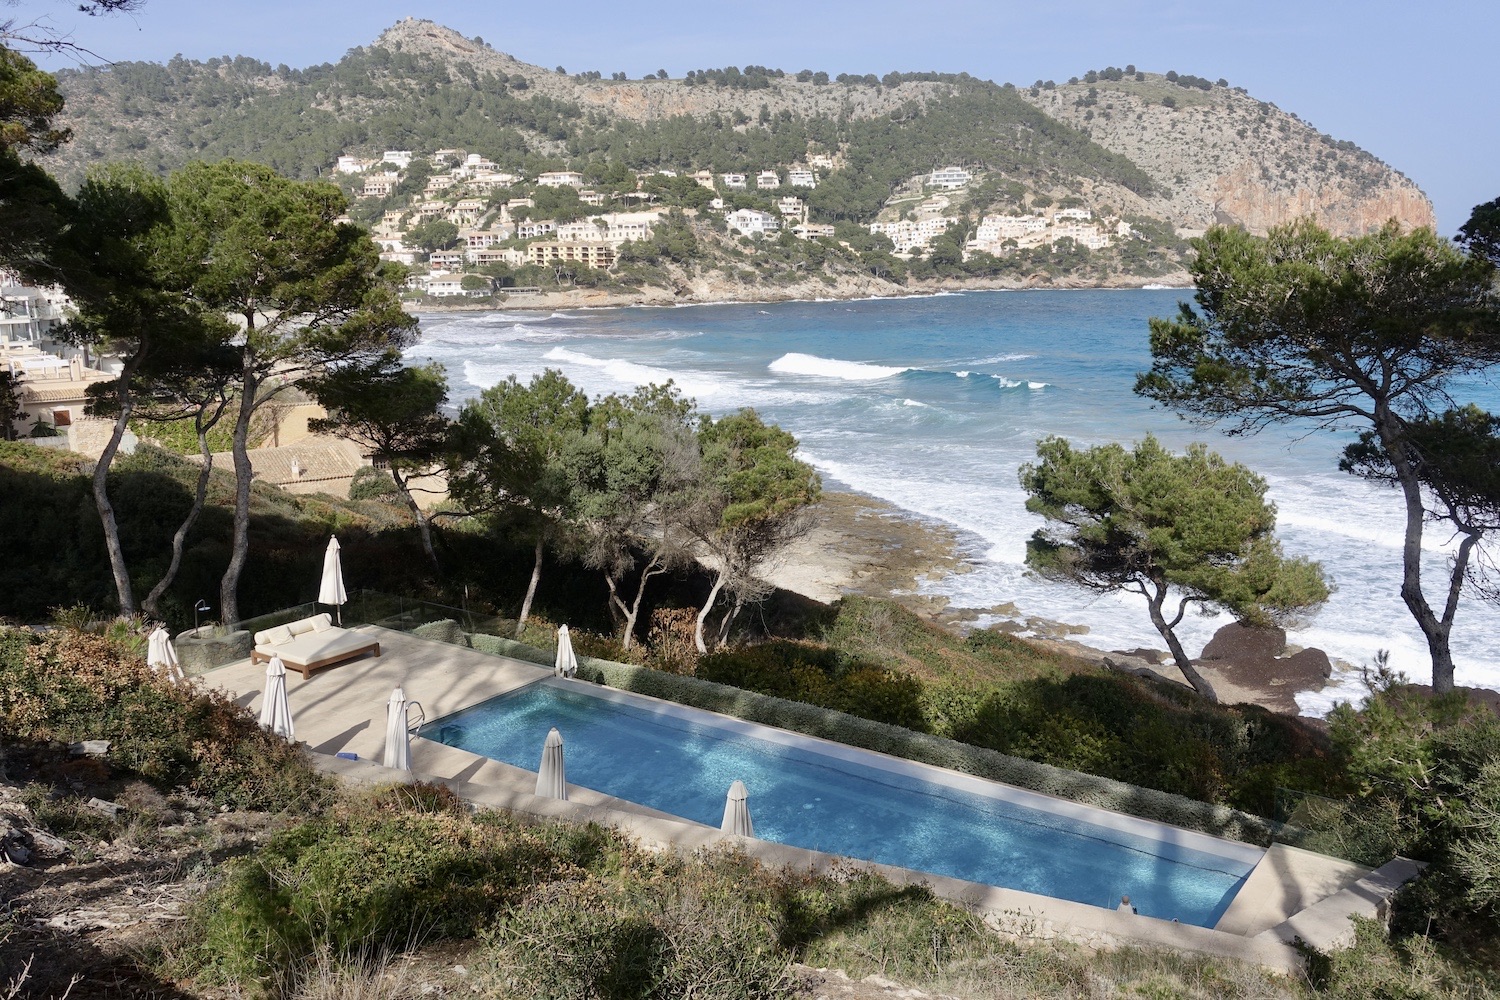 Staying & dining in style in Mallorca's northeast/Balearics, Spain